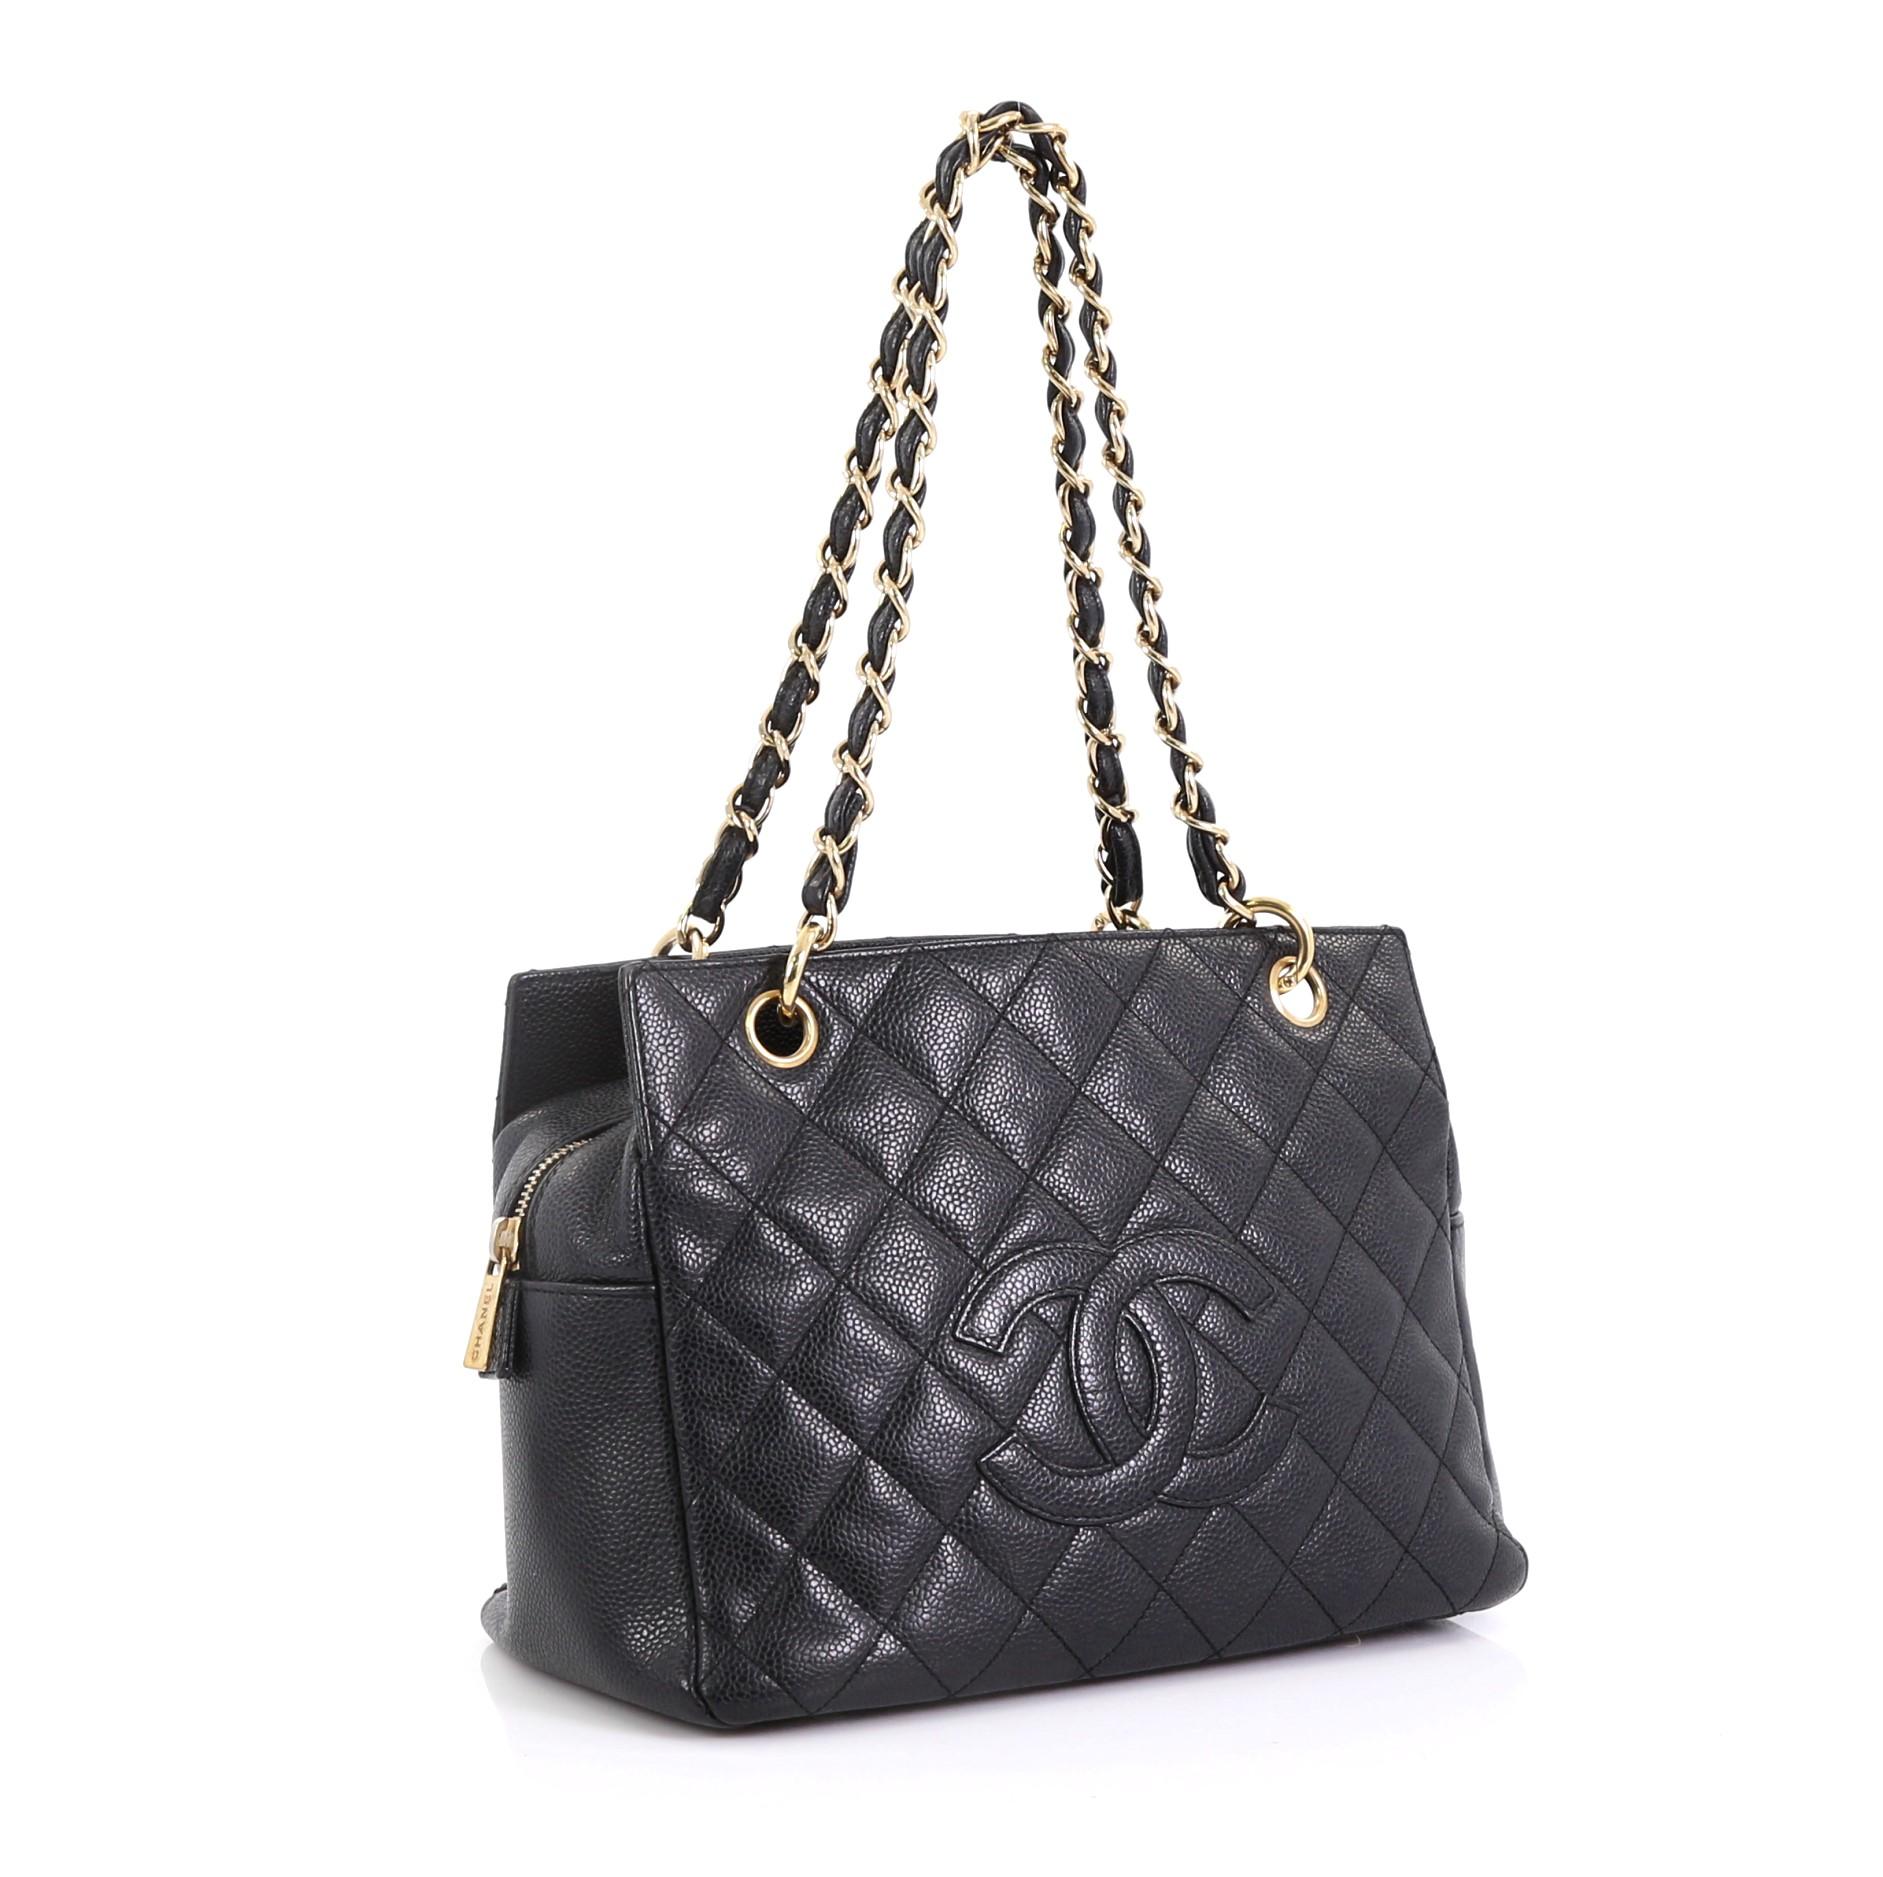 This Chanel Petite Timeless Tote Quilted Caviar, crafted in black quilted caviar leather, features dual woven in leather chain link straps, interlocking CC logo, and gold-tone hardware. Its zip closure opens to a black fabric interior with side zip